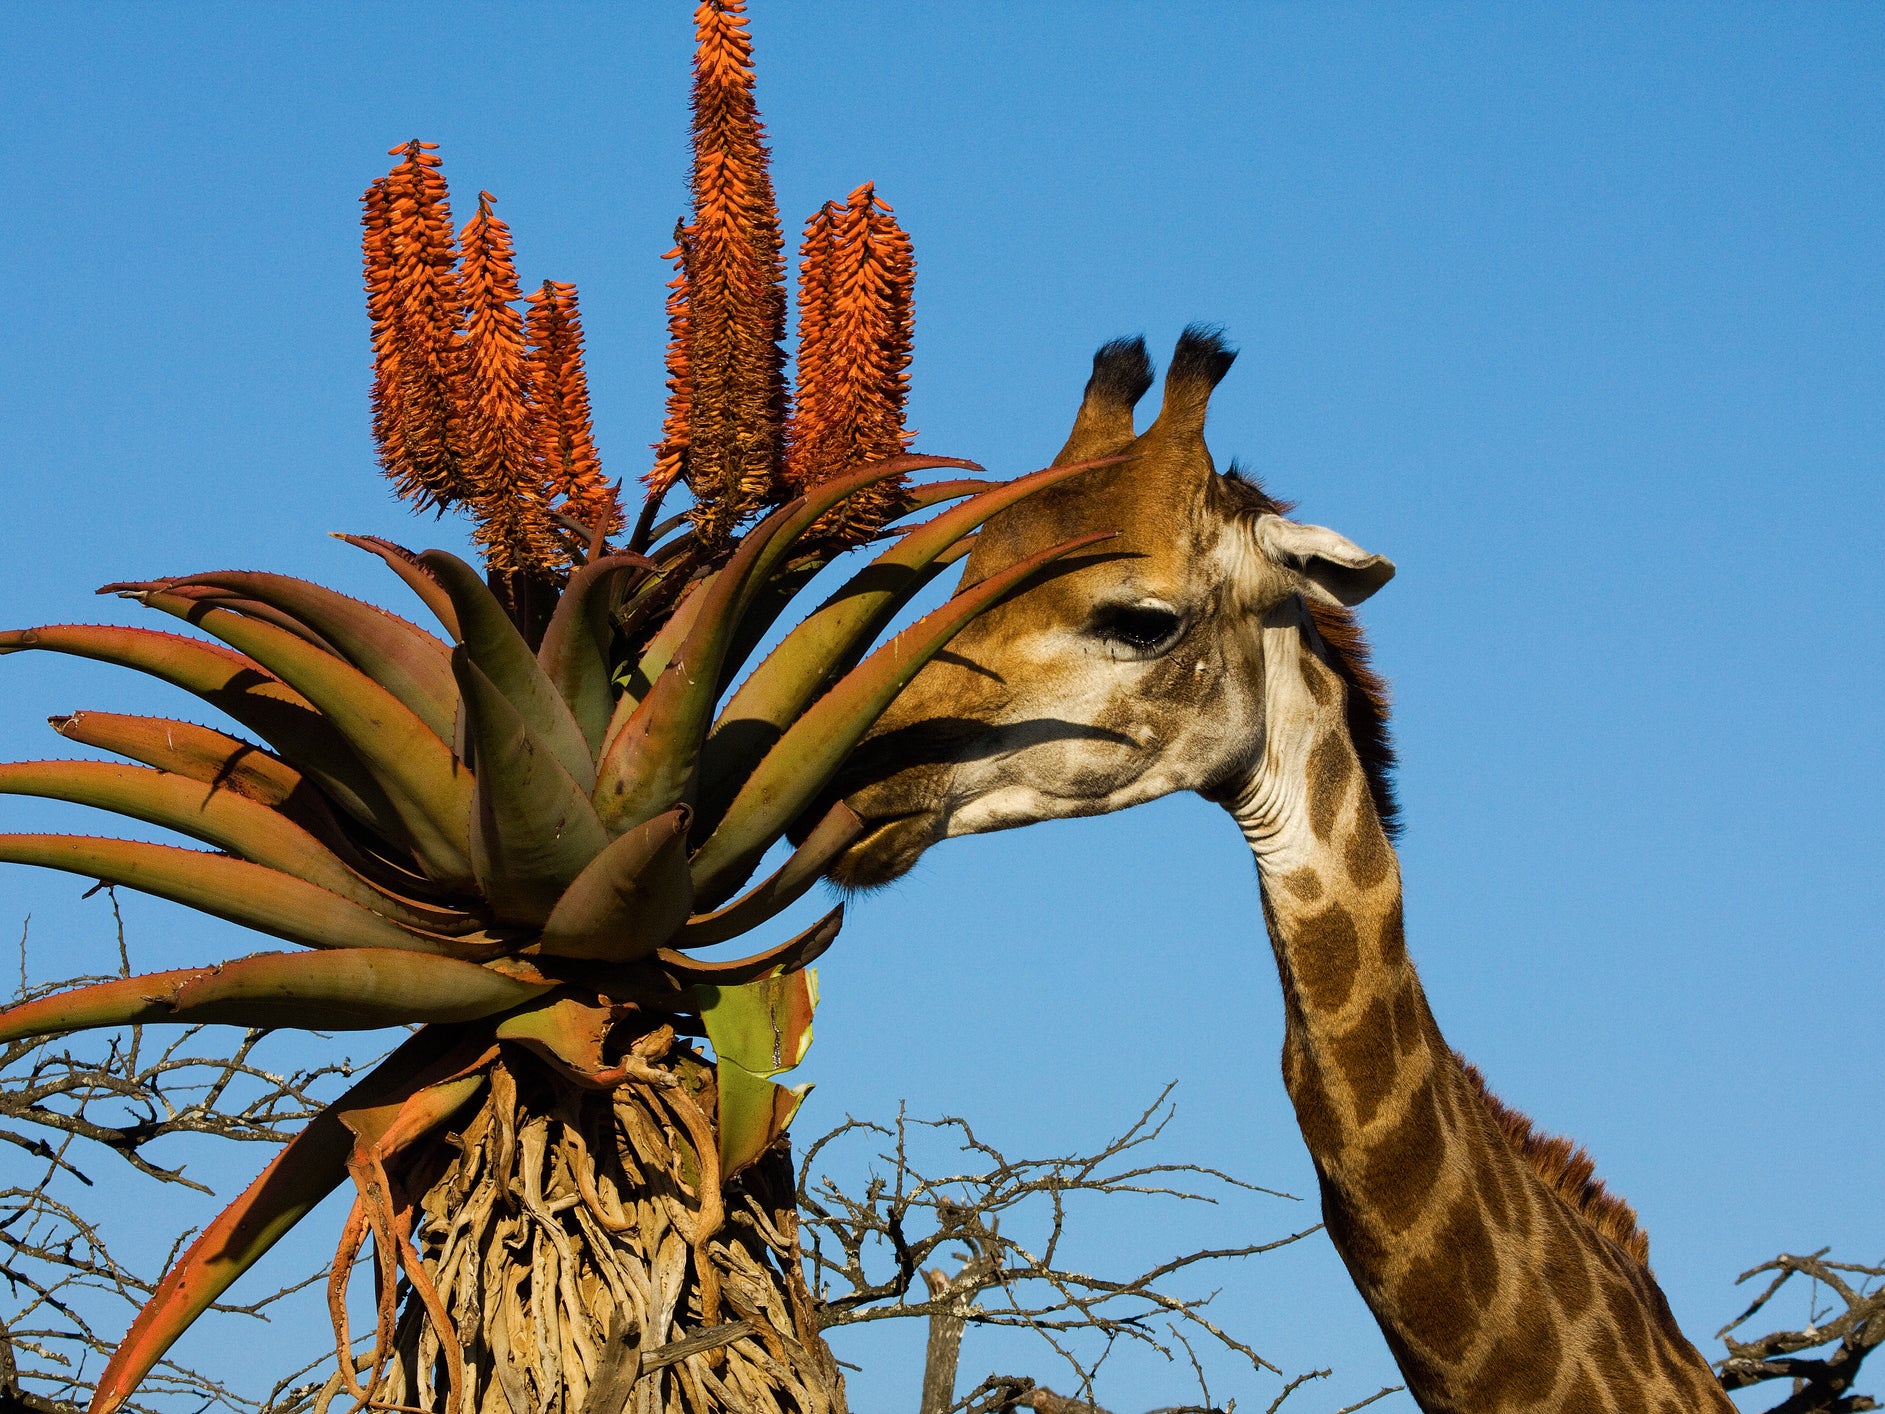 Giraffes and other mammals, insects and fish are all declining as their habitat is lost and the climate changes